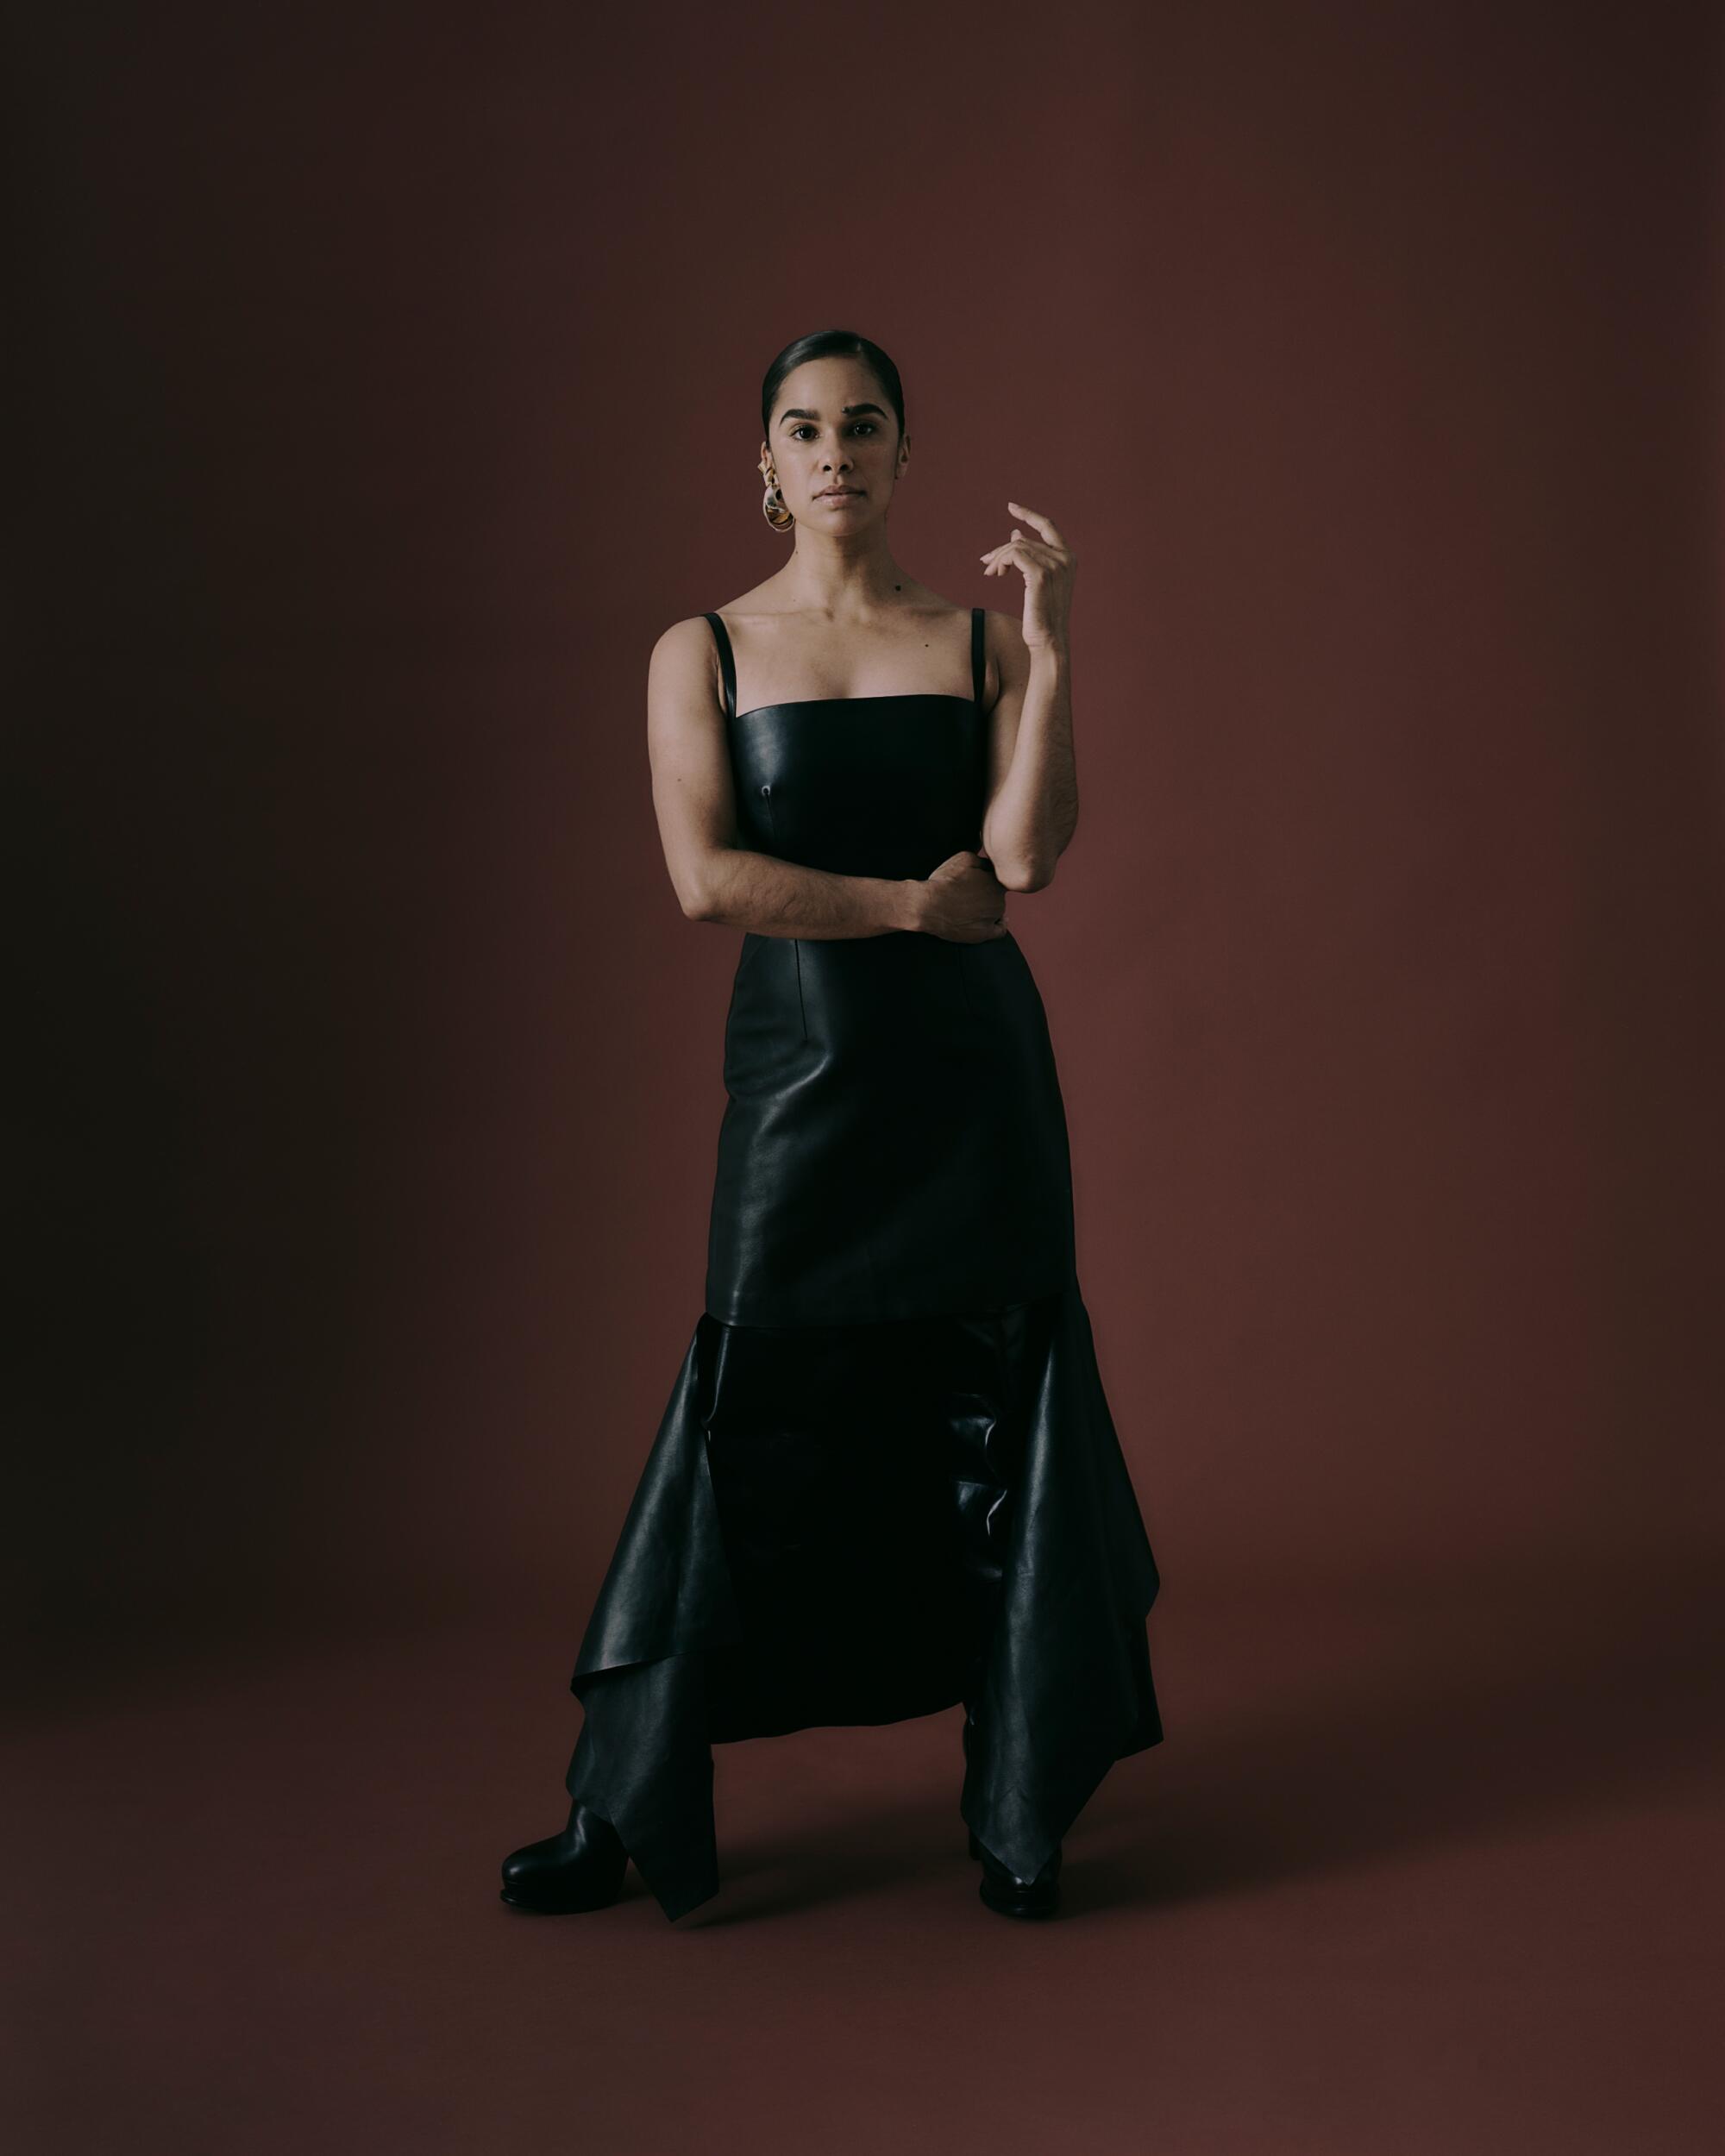 Misty Copeland wearing a black dress and black shoes.